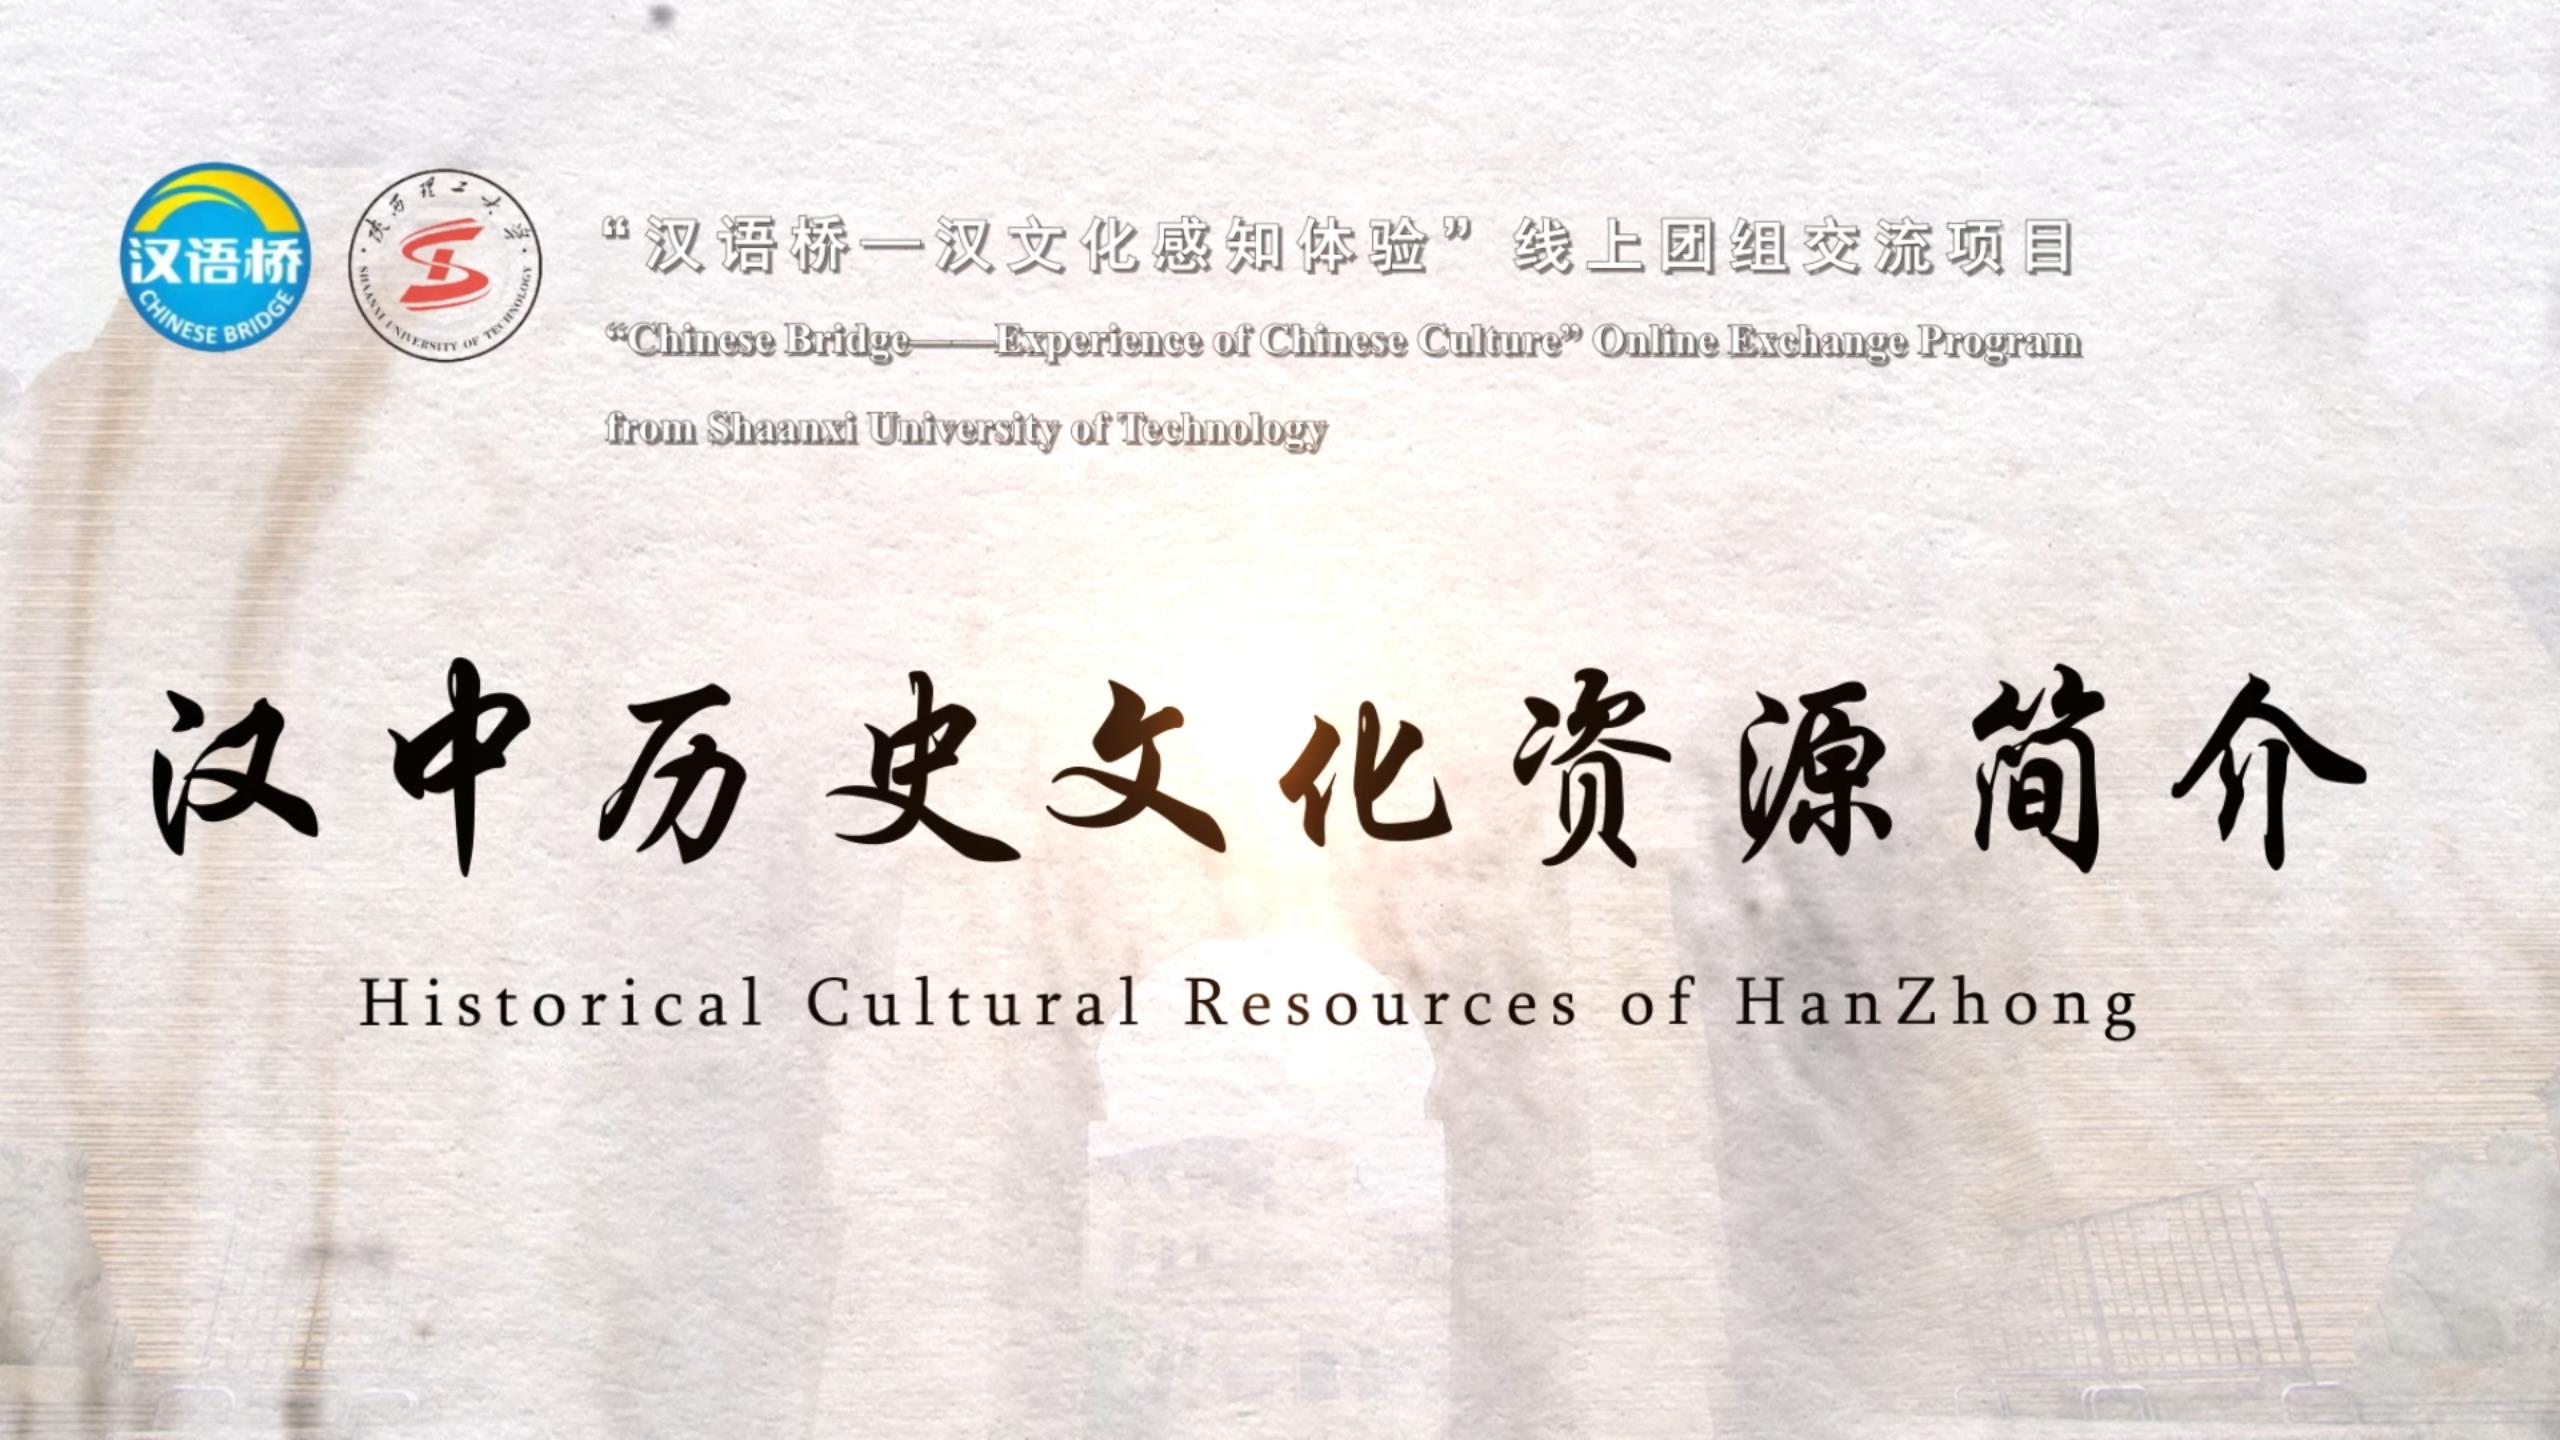 Historical and Cultural Resources of Hanzhong